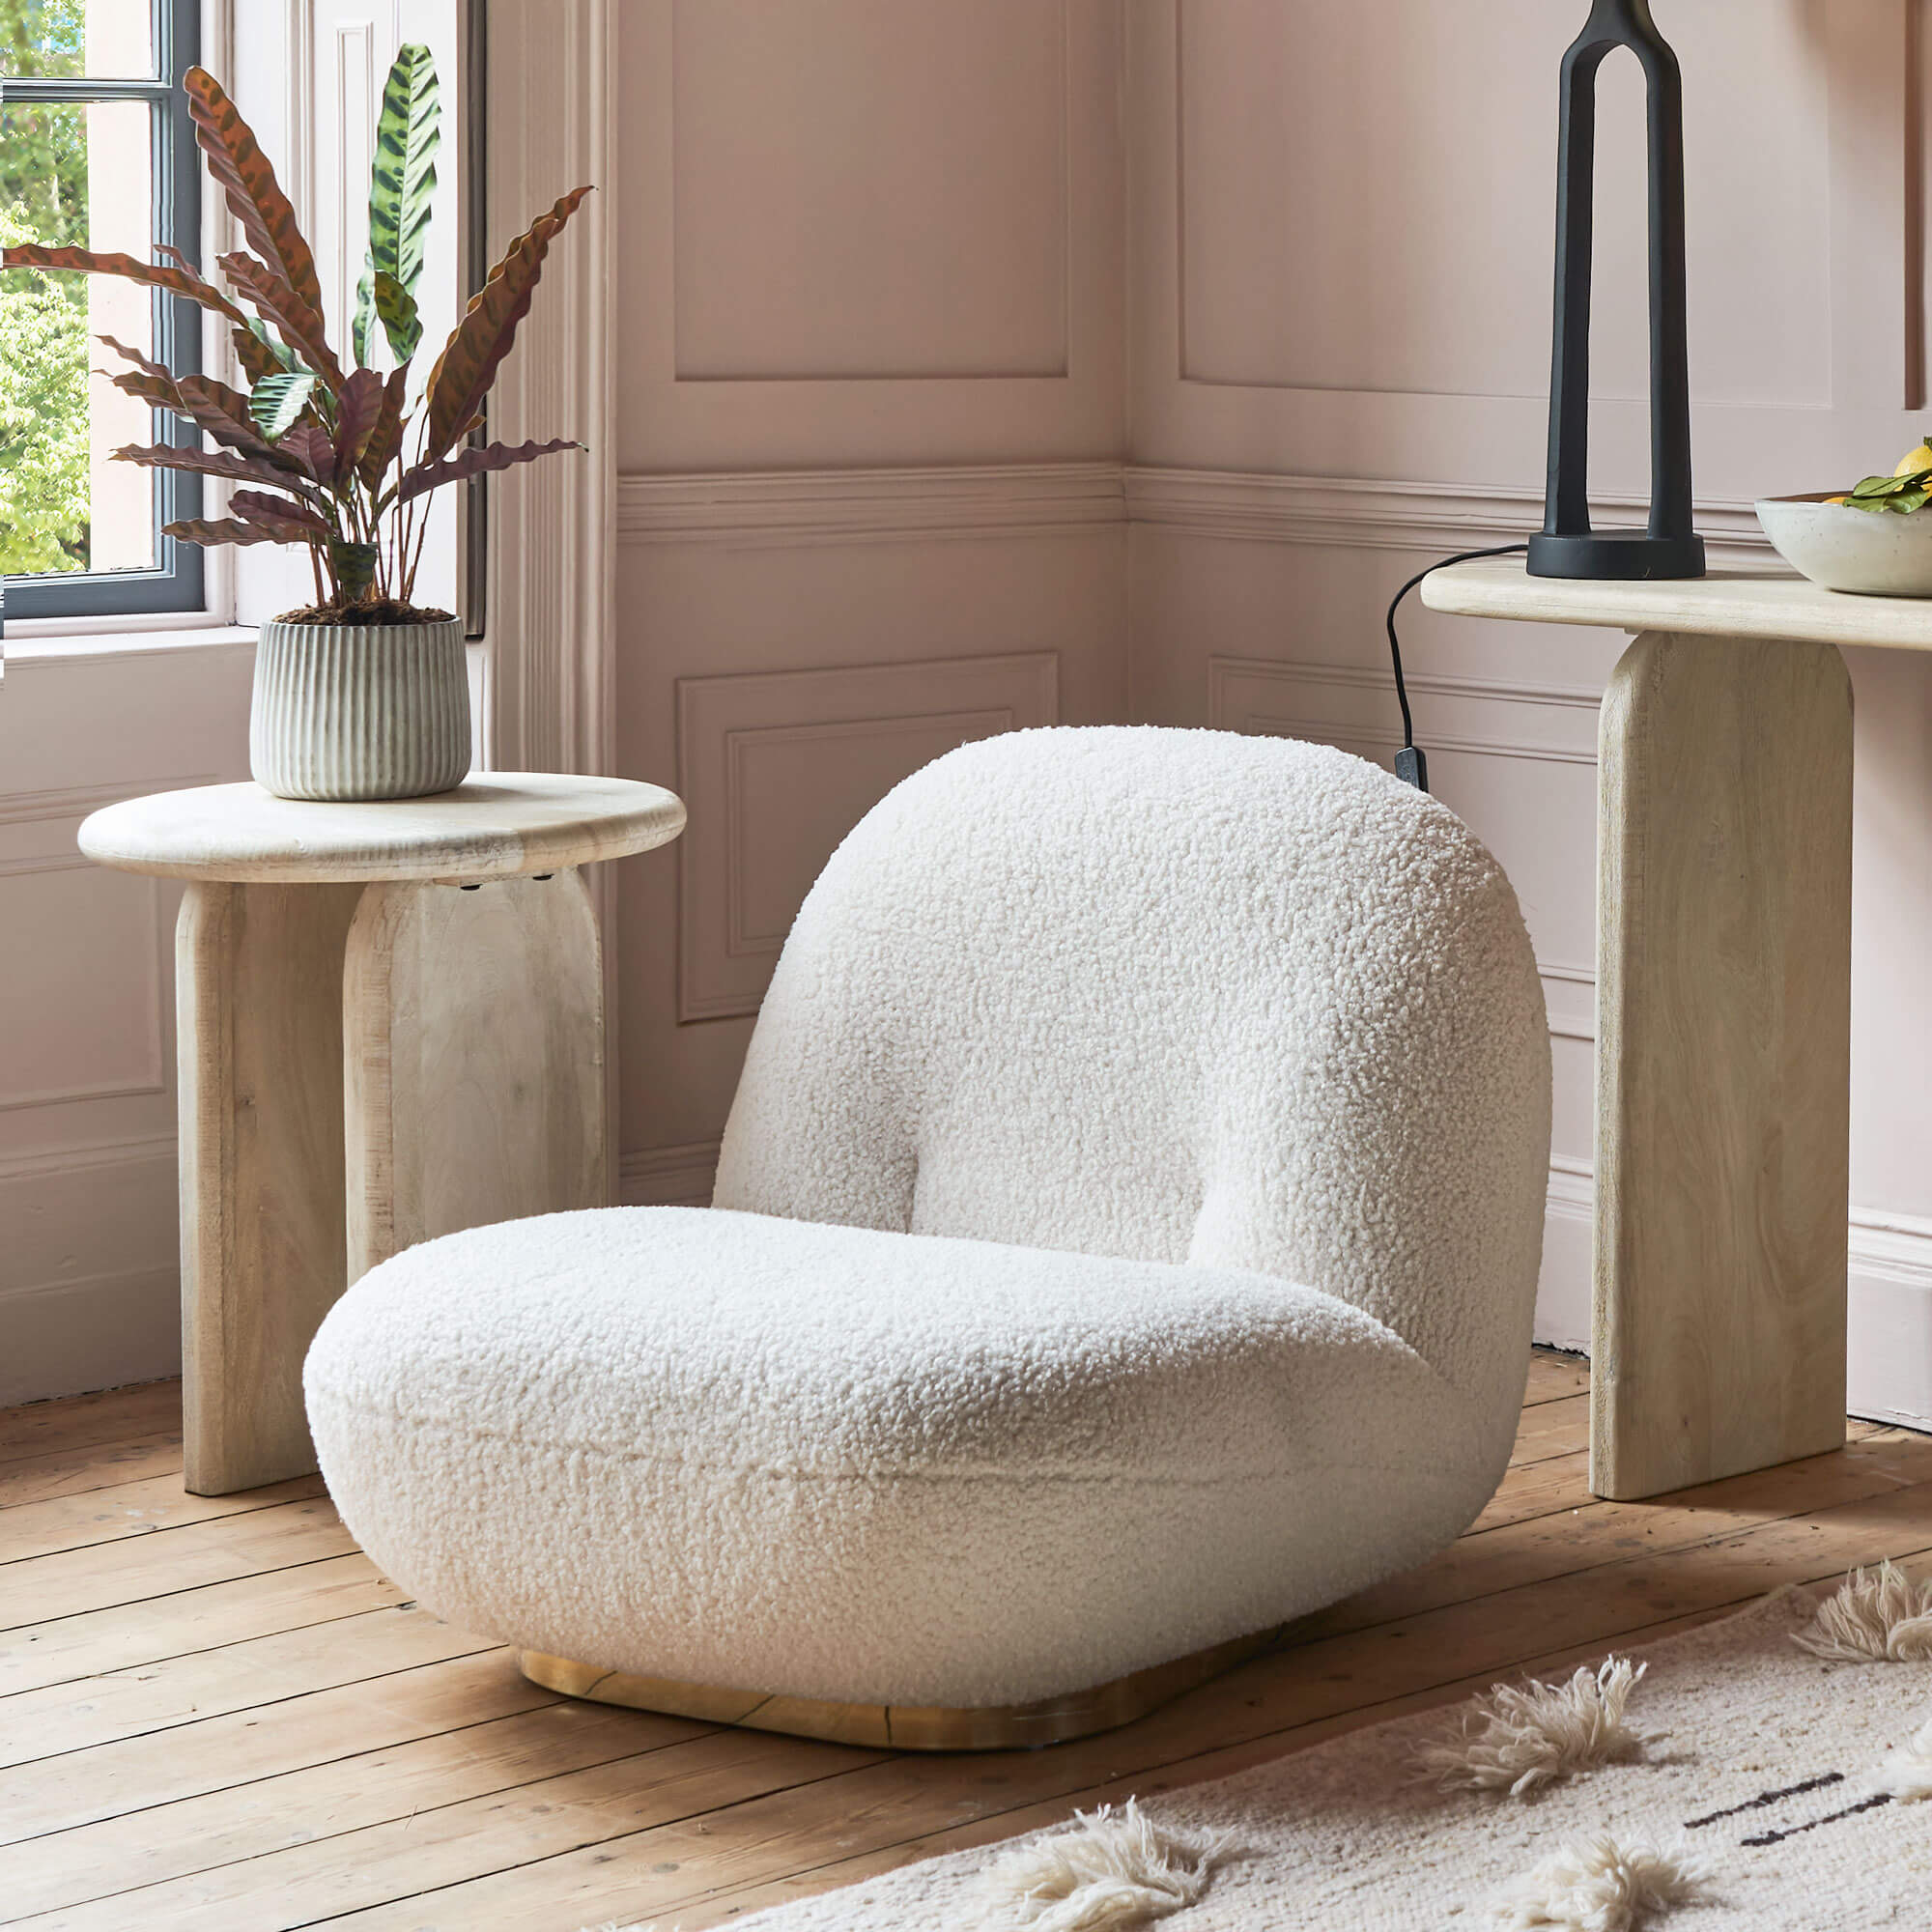 Read more about Graham and green white cloud chair